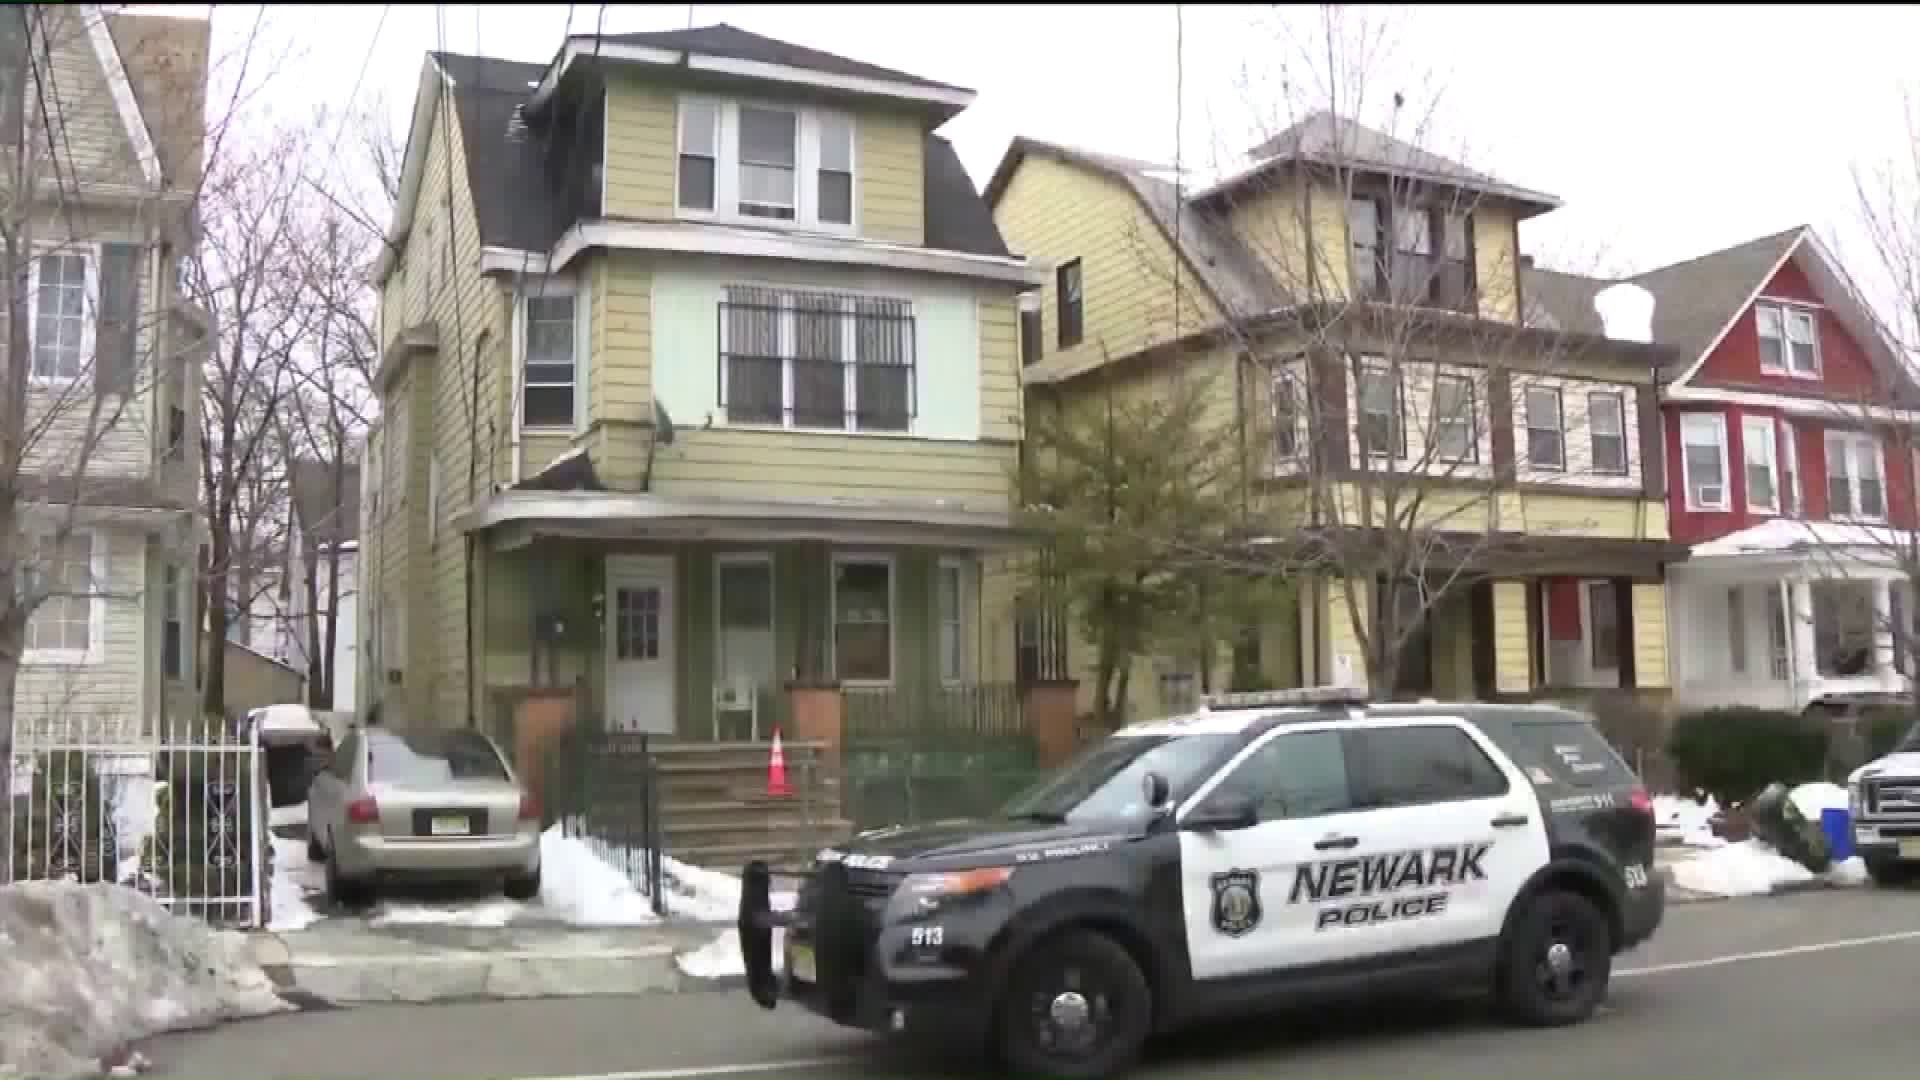 10-Year-Old Boy from Scranton Shot and Killed in New Jersey